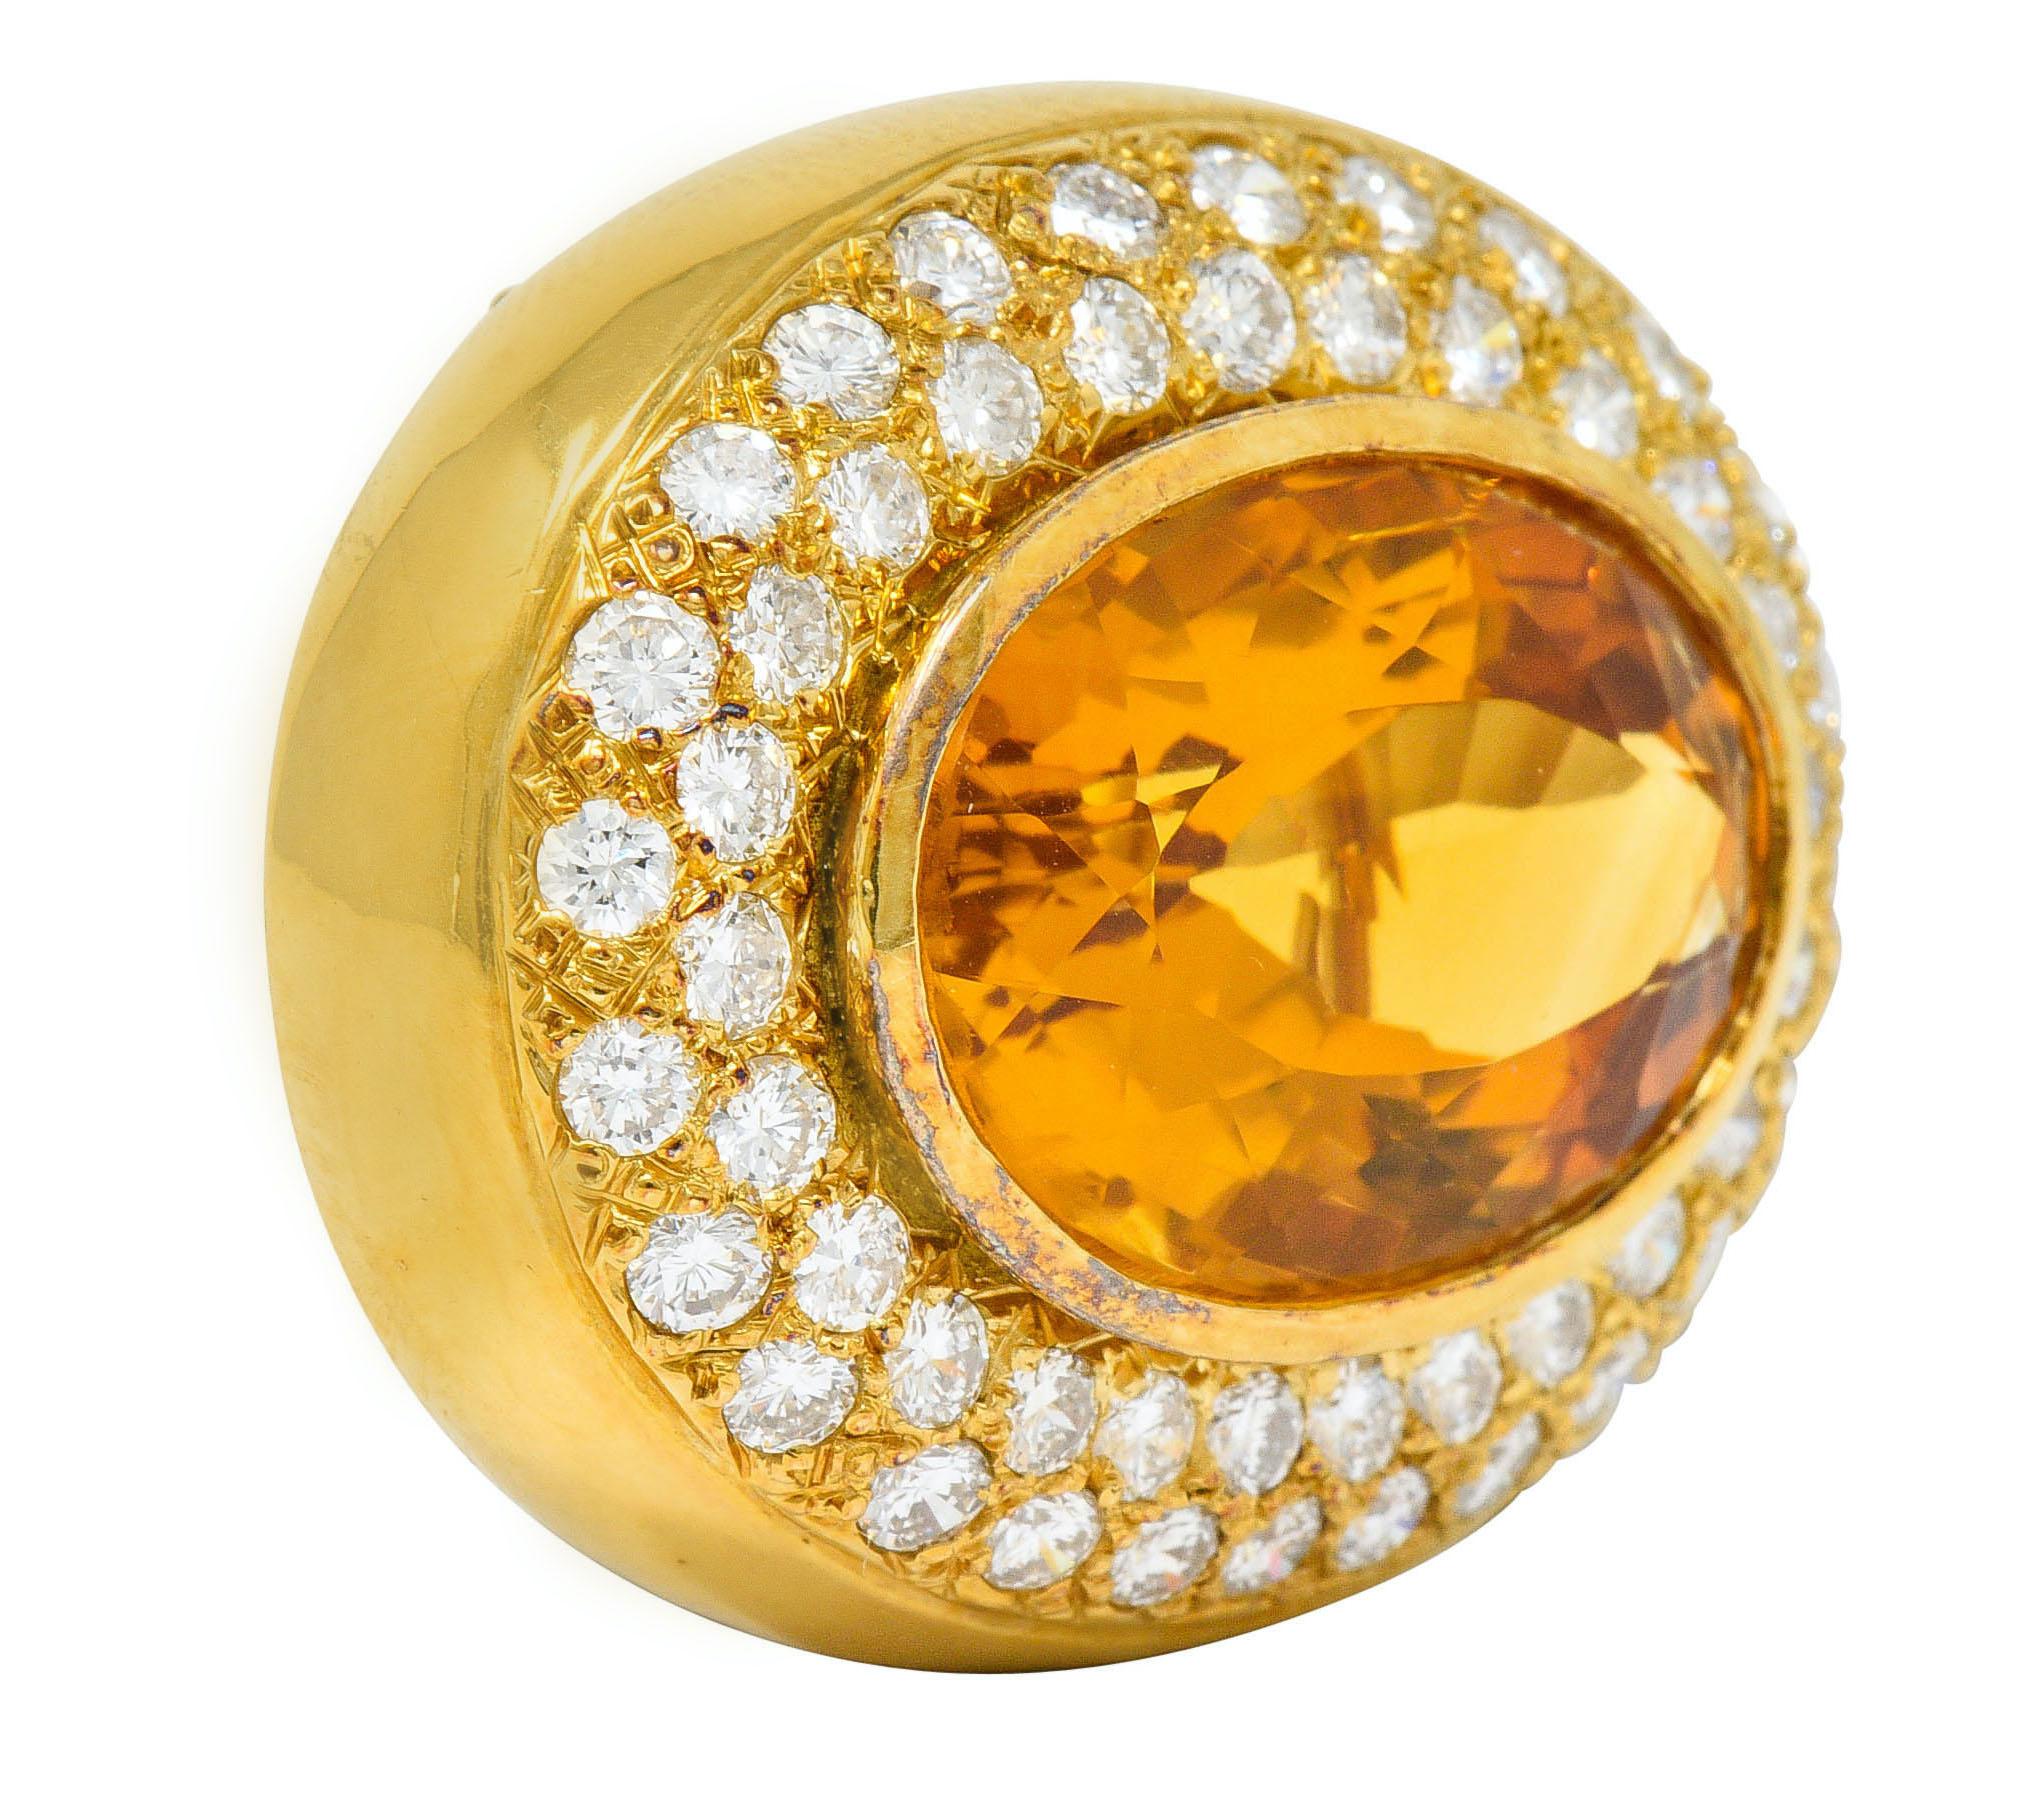 Centering a bezel set mixed oval cut citrine measuring approximately 19.0 x 14.0 mm

Transparent with strong orange color, uniform in distribution

Surrounded by pavè set round brilliant cut diamonds weighing in total approximately 2.00 carats; G/H